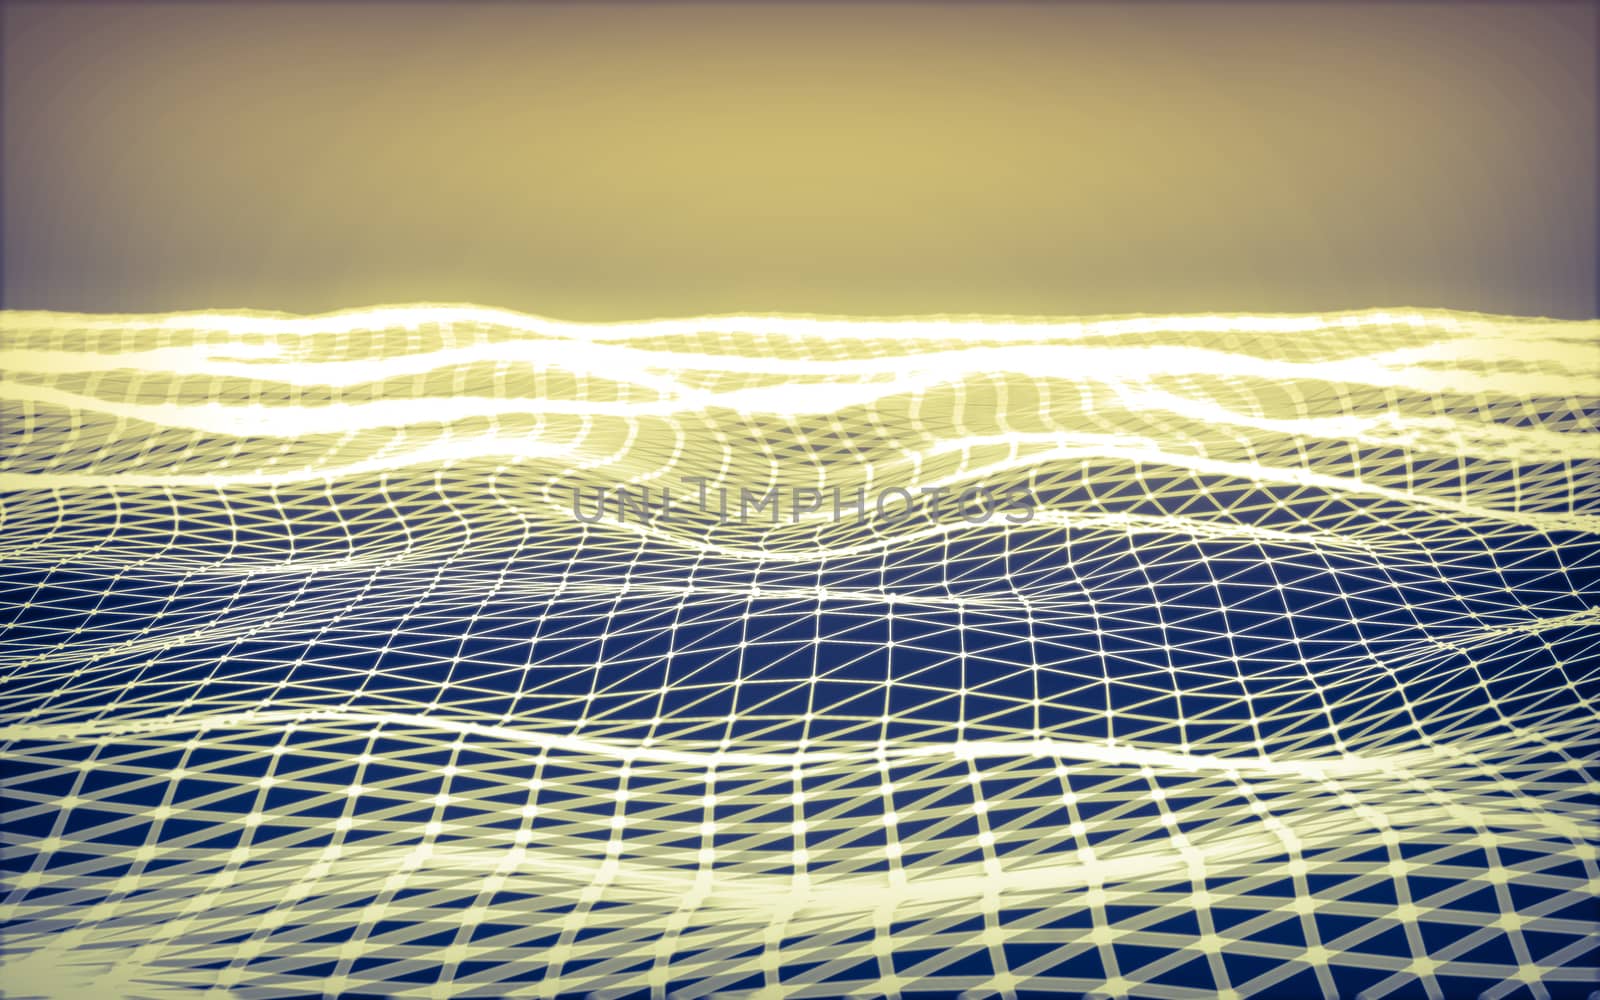 Abstract polygonal space low poly dark background with connecting dots and lines. Connection structure.